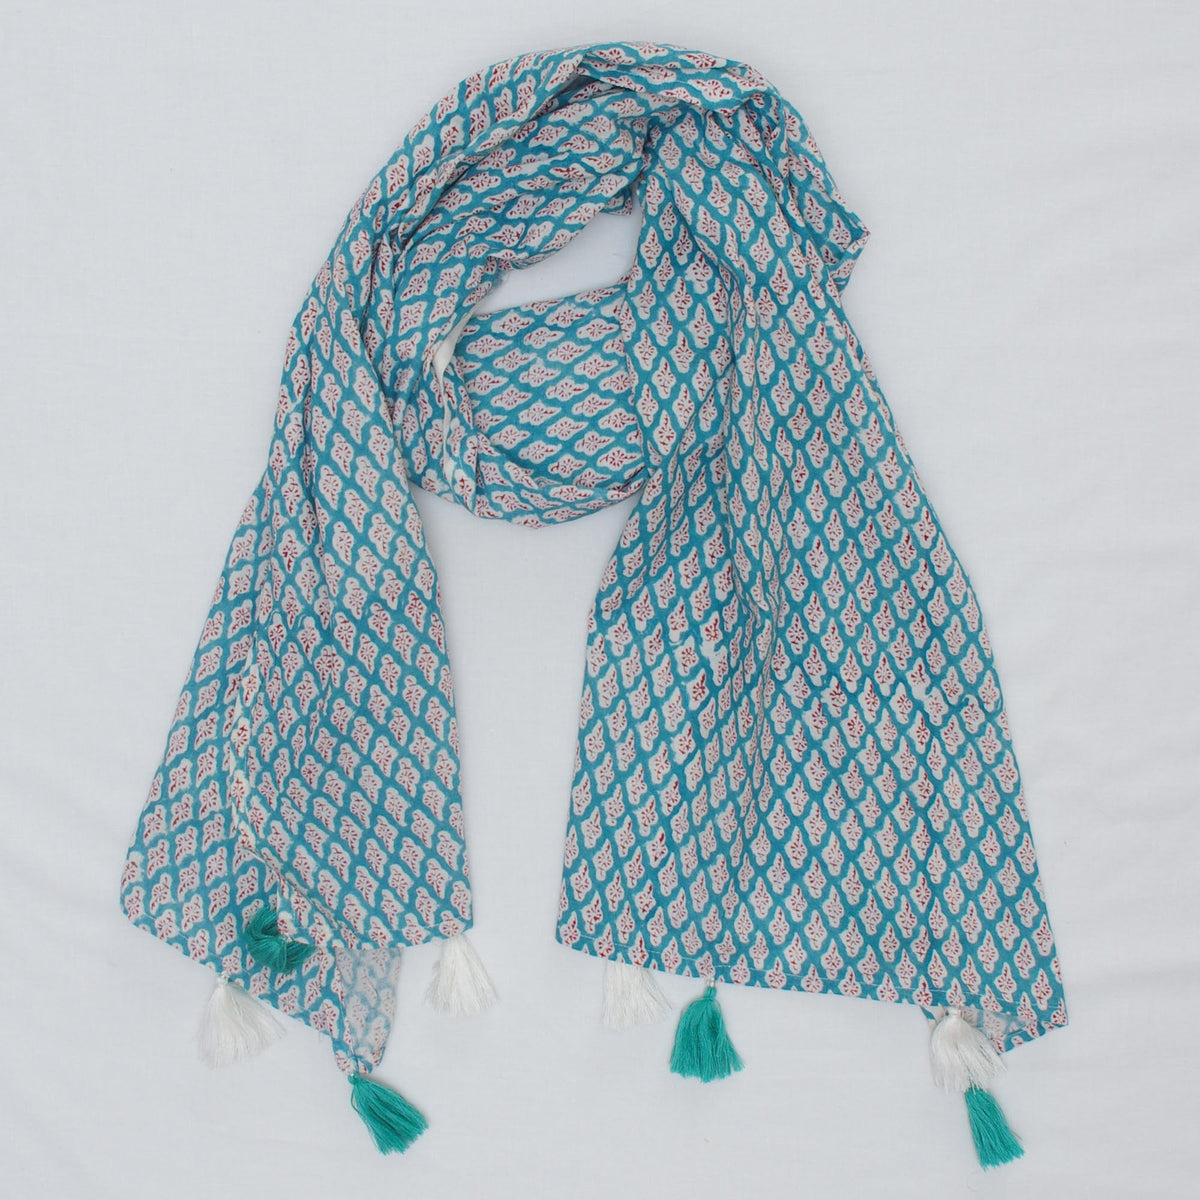 Cotton Scarf In Red Motif On Teal Green With Tussle